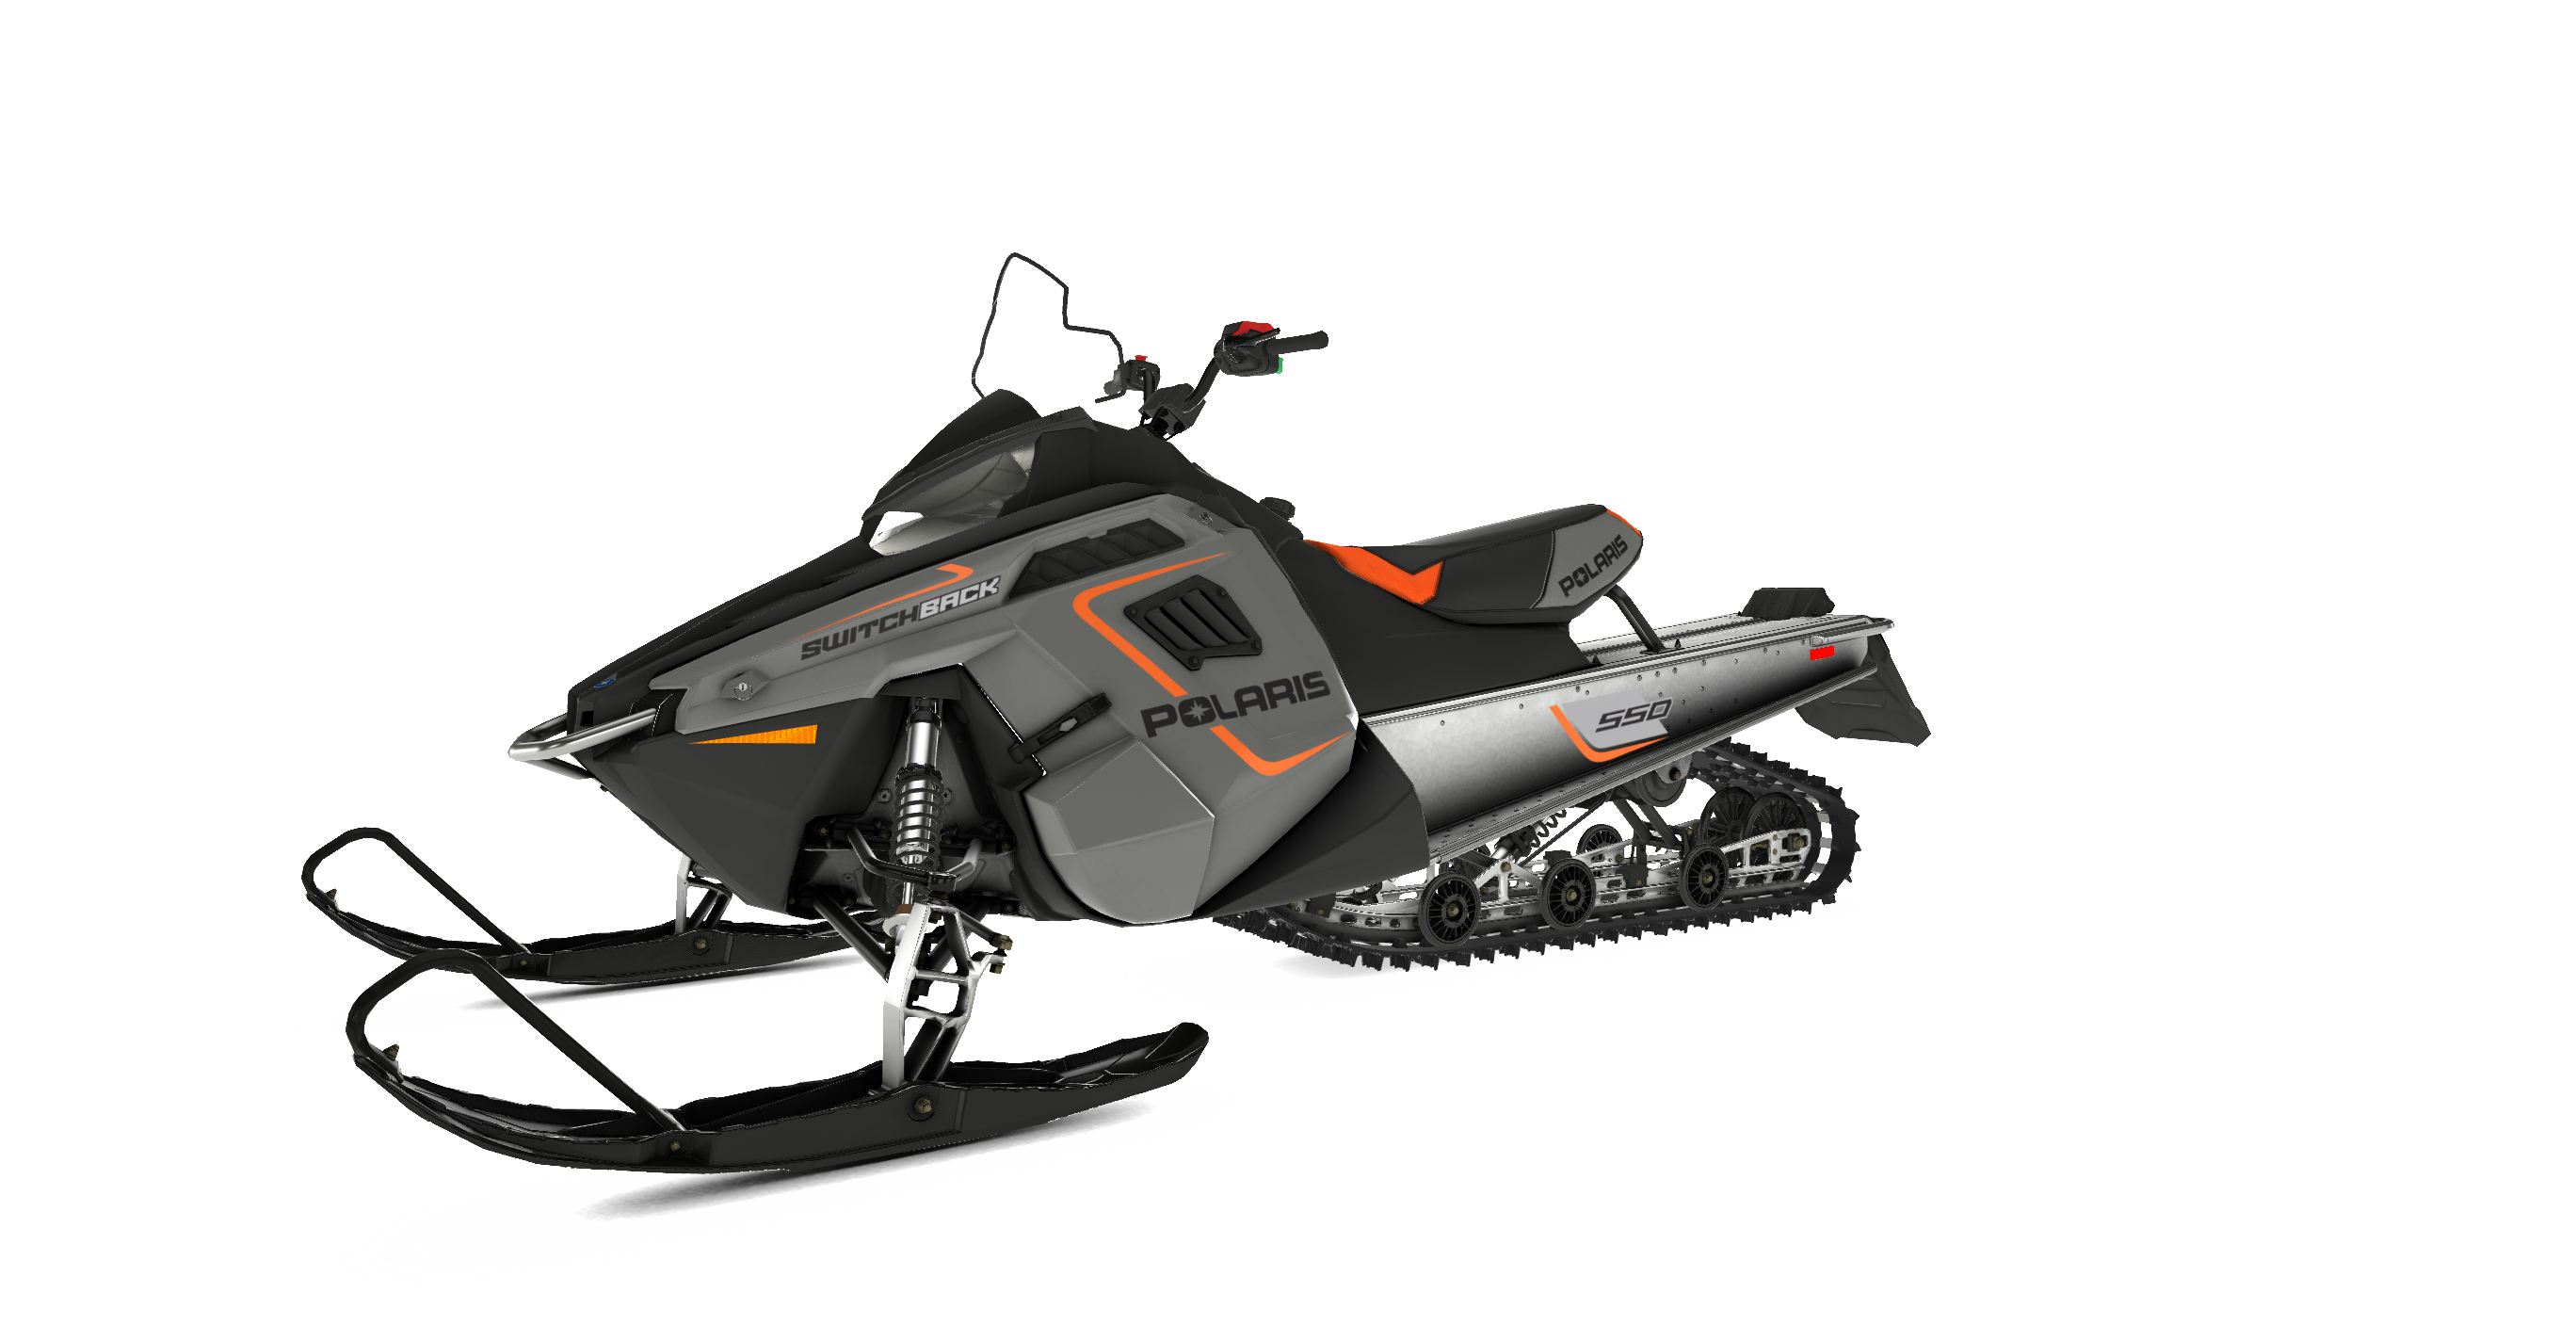 Popular Links — Kra-Z's Snowmobile Rentals and Backcountry Guide